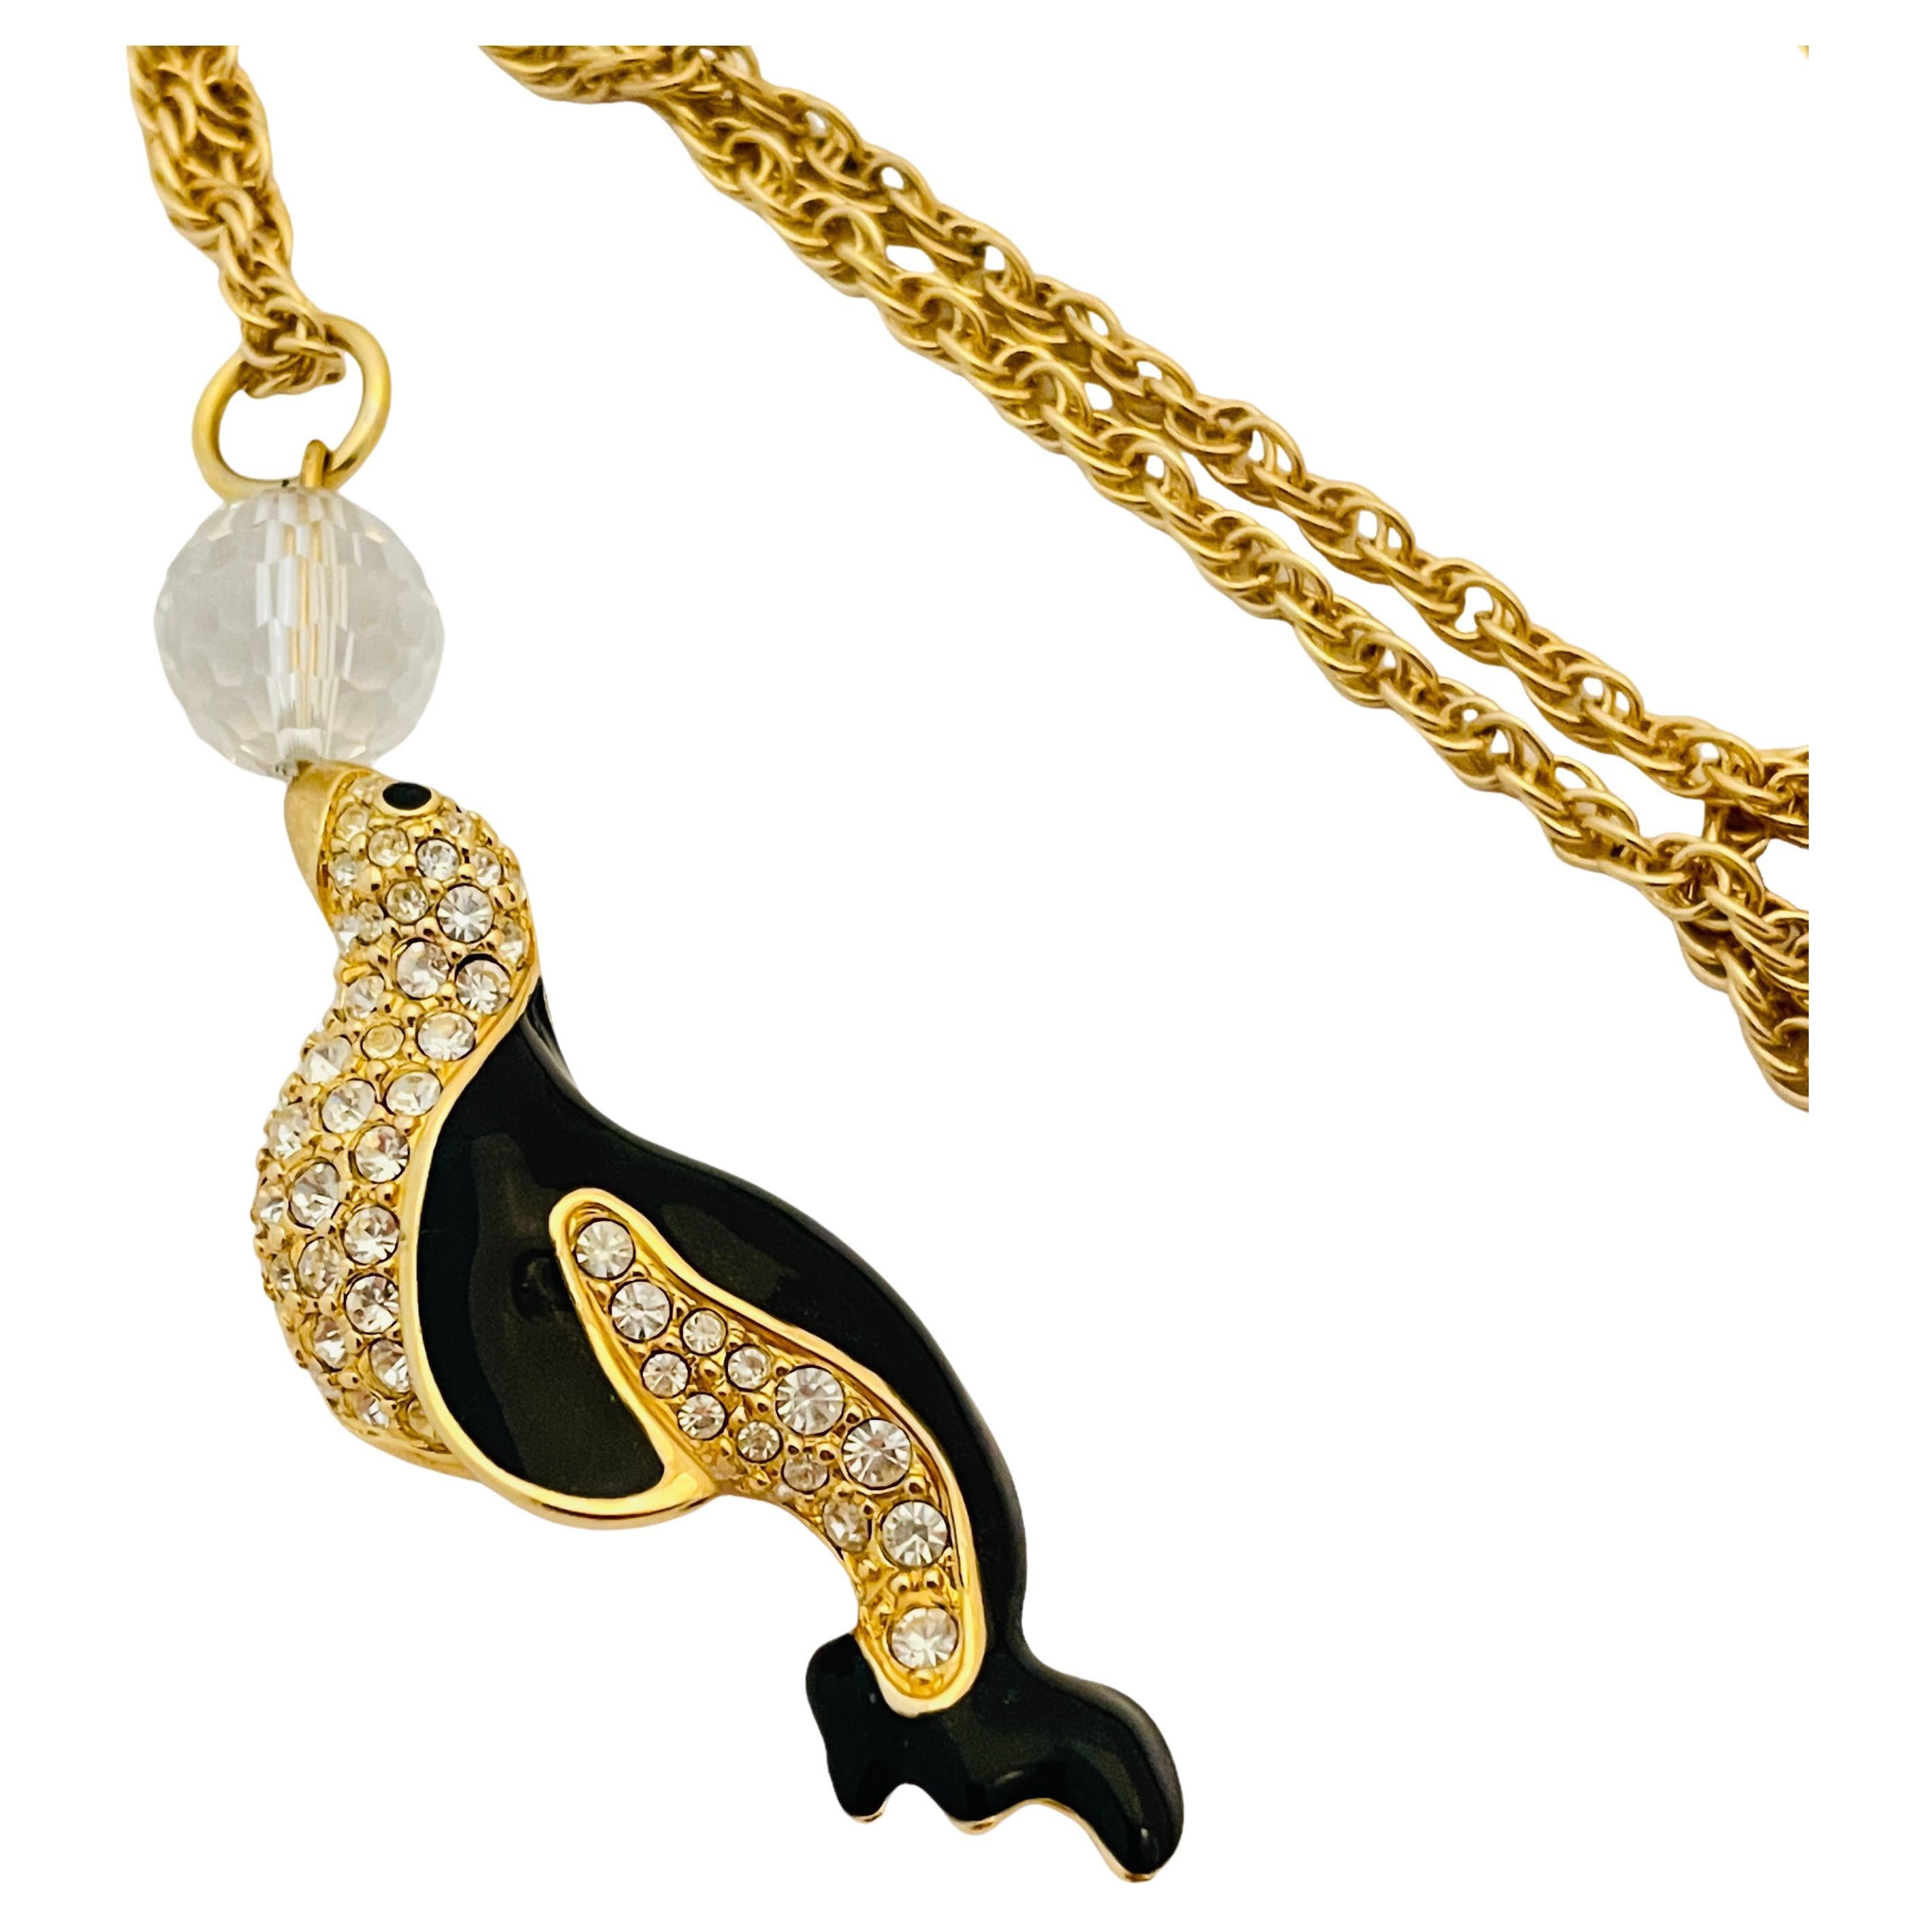 22K GOLD PLATED Designer Necklace Earrings Indian Wedding Jewelry Sale  Price V $32.33 - PicClick AU